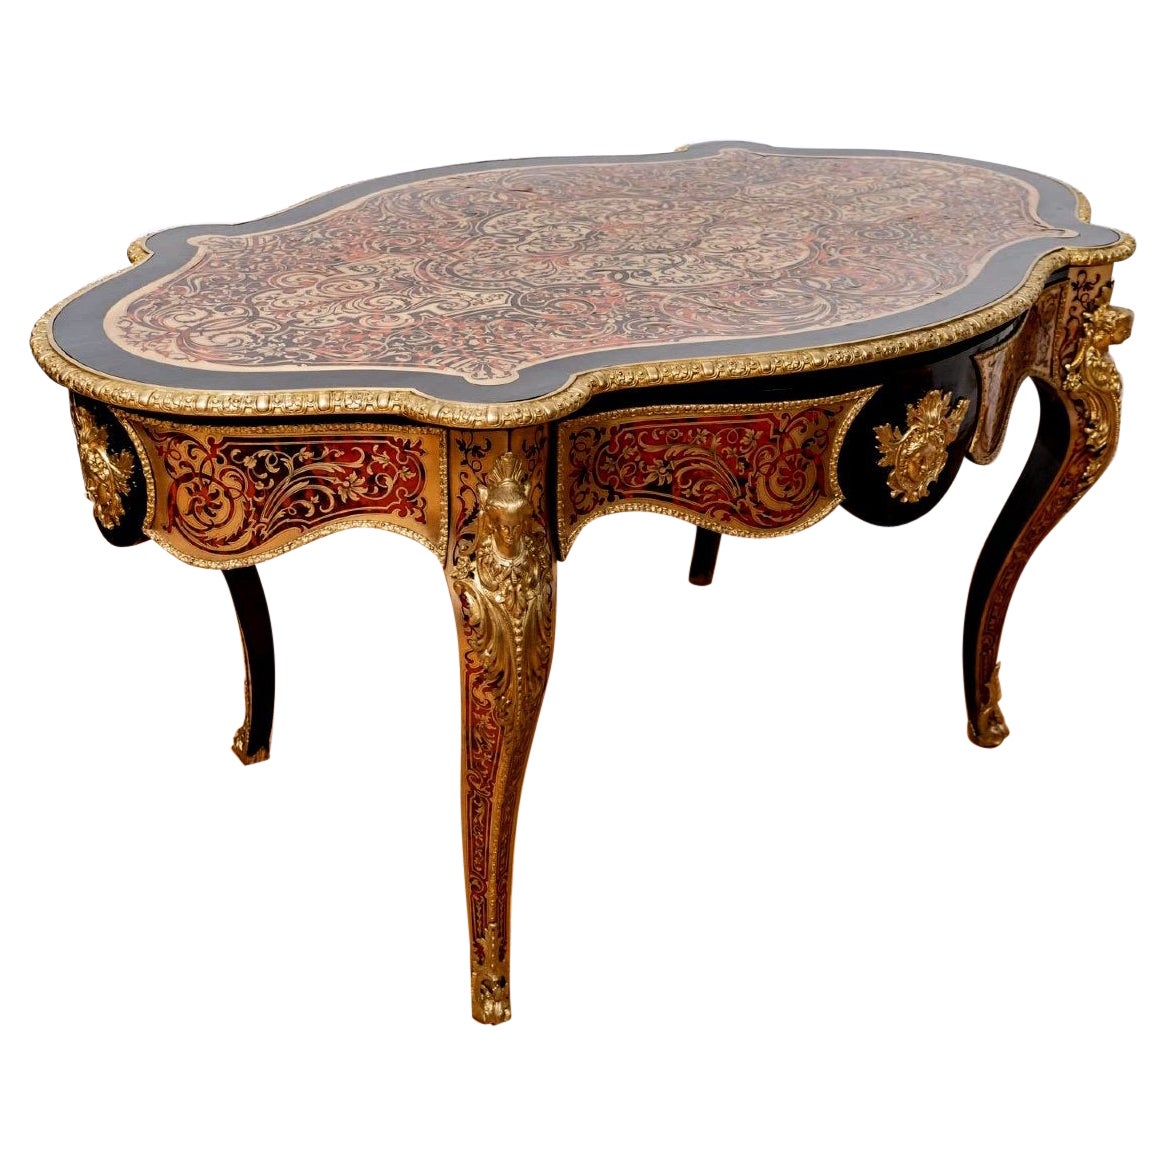 Ceremonial Table Marquetry André Boulle - Violin Shape - Period: XIXth For Sale